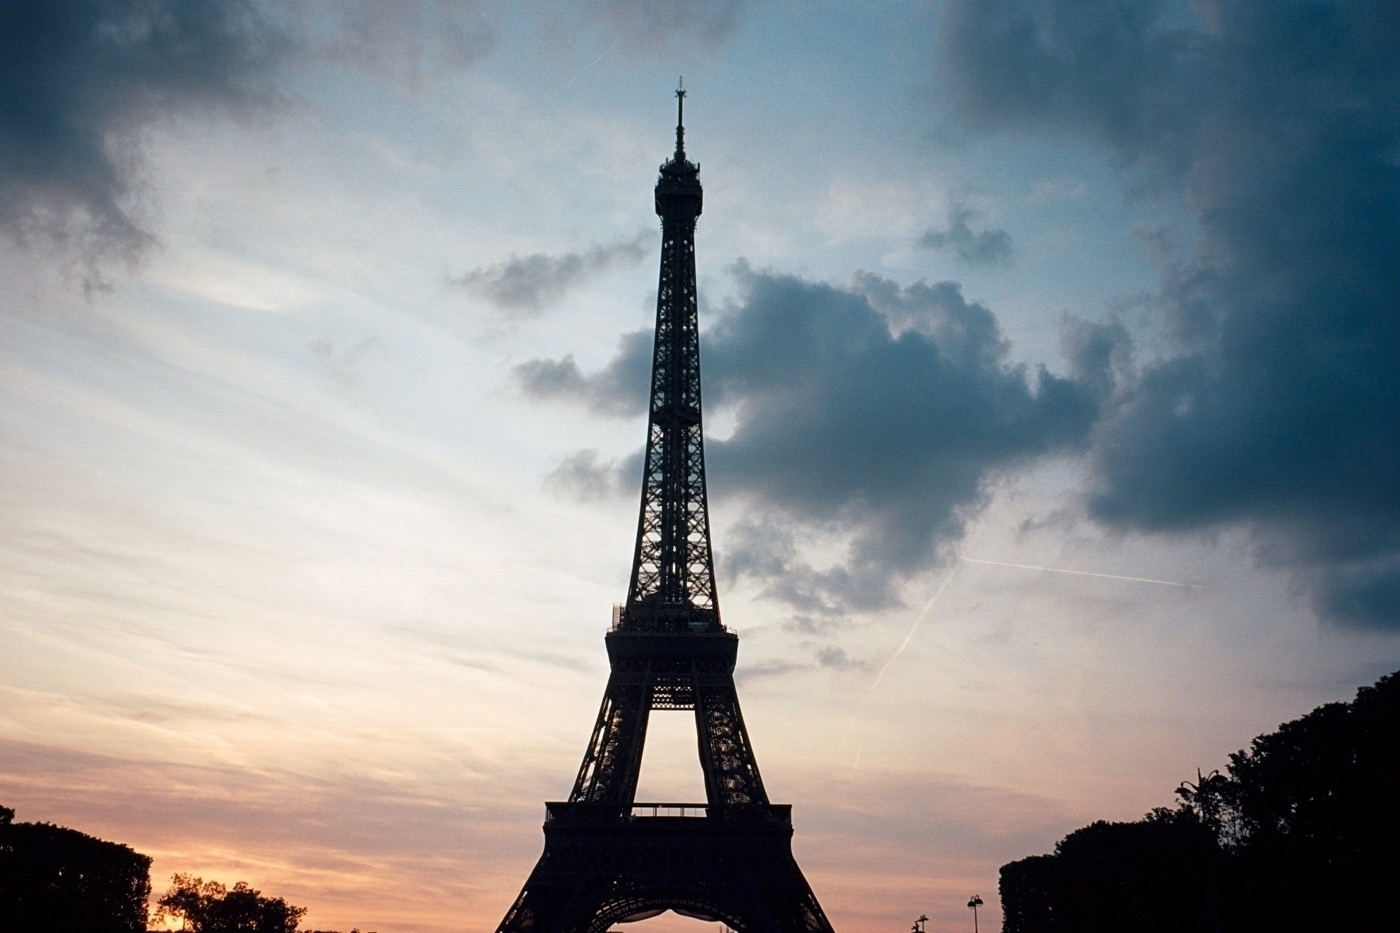 Eiffel Tower. Photo taken with Leica Z2X in Paris by Josh Withers.